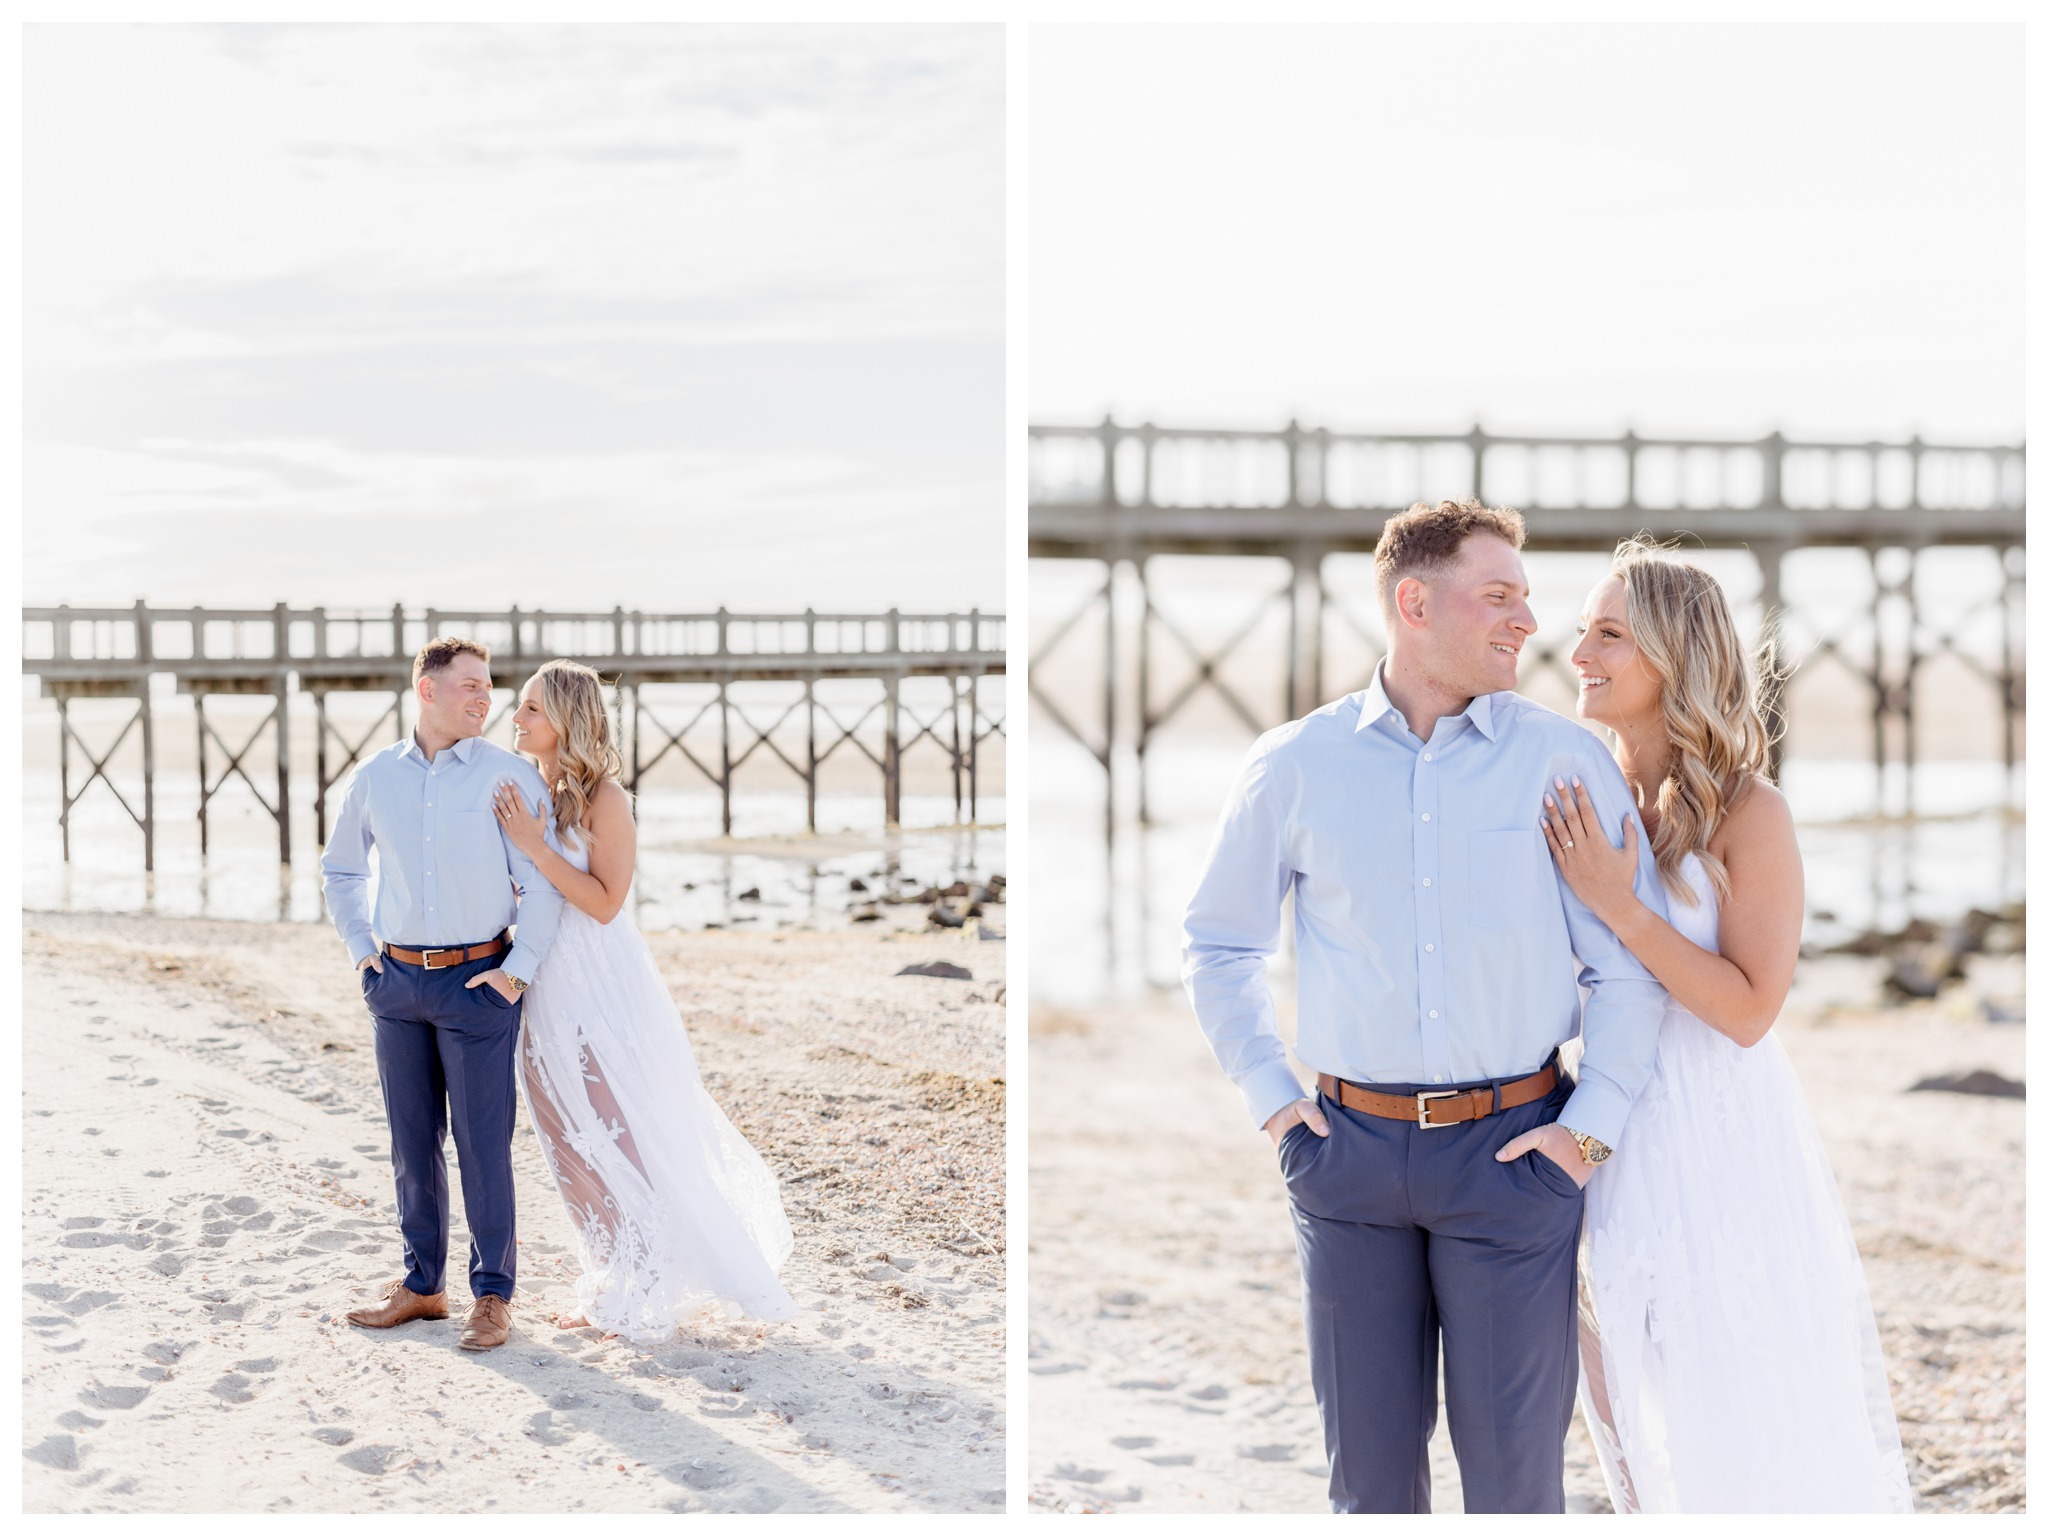 walnut beach engagement session in milford ct at silver sands beach